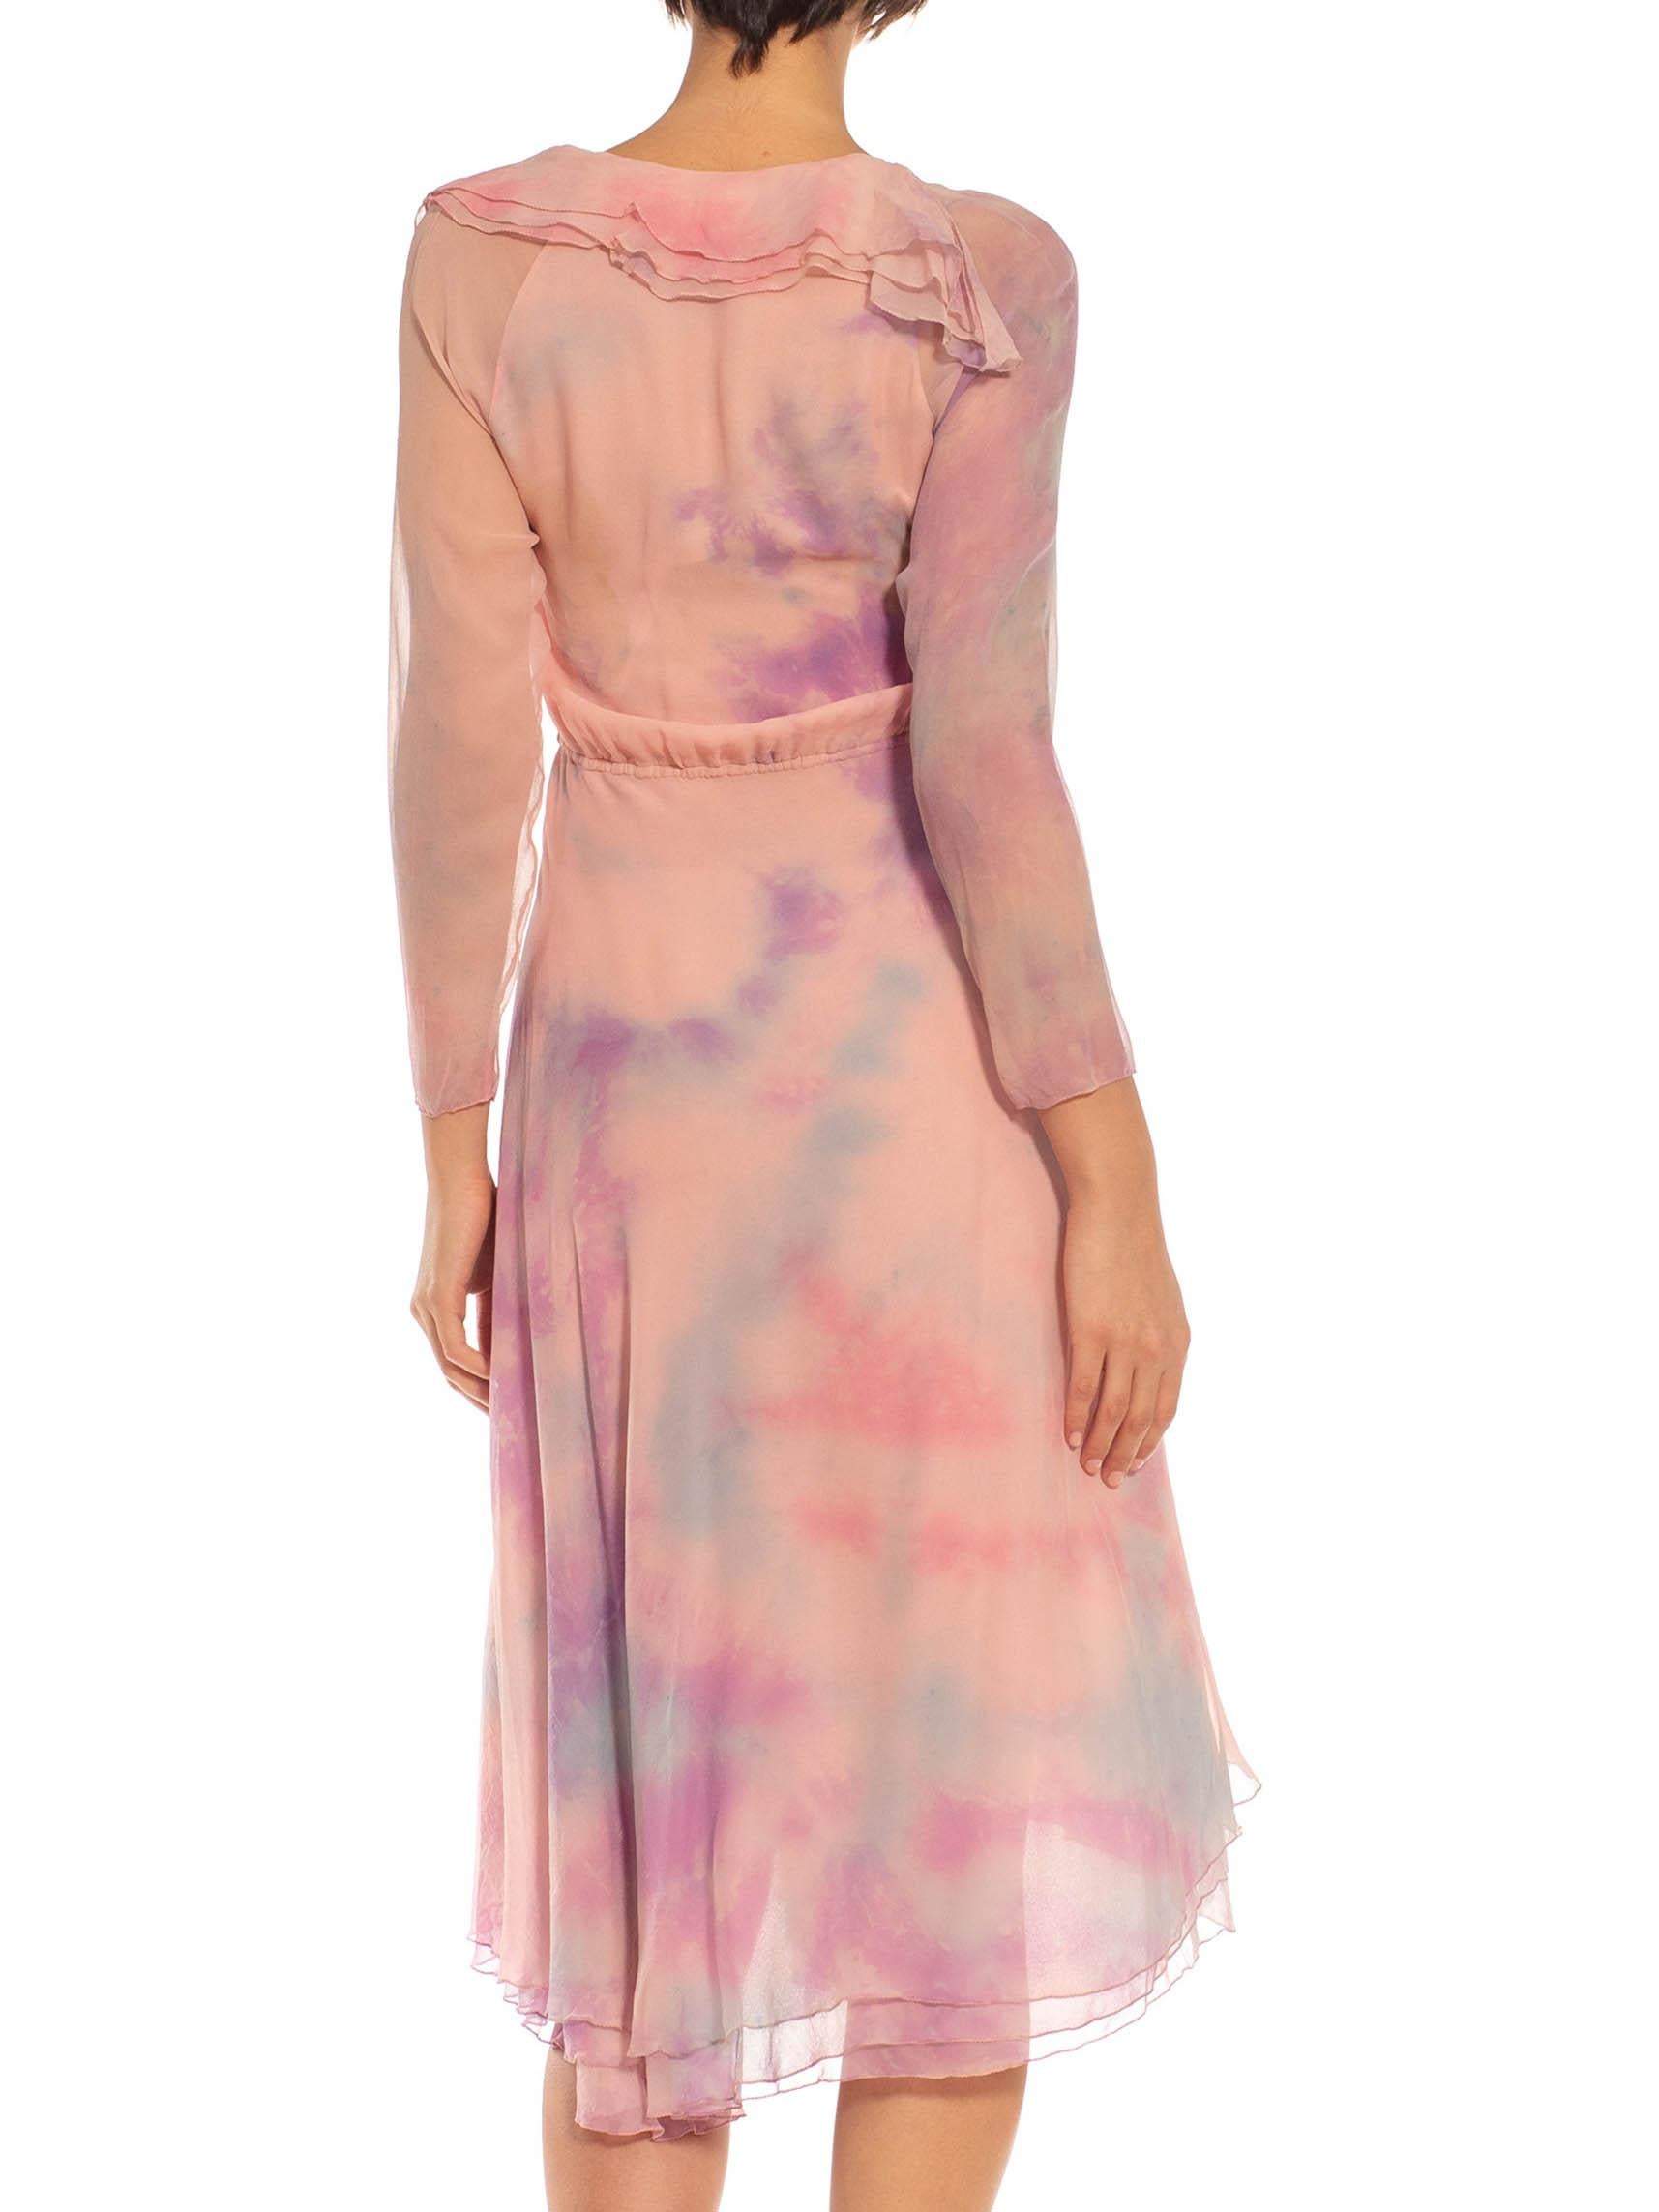 1970S STEPHEN BURROWS Pink Tie Dyed Silk Chiffon Dress For Sale 2